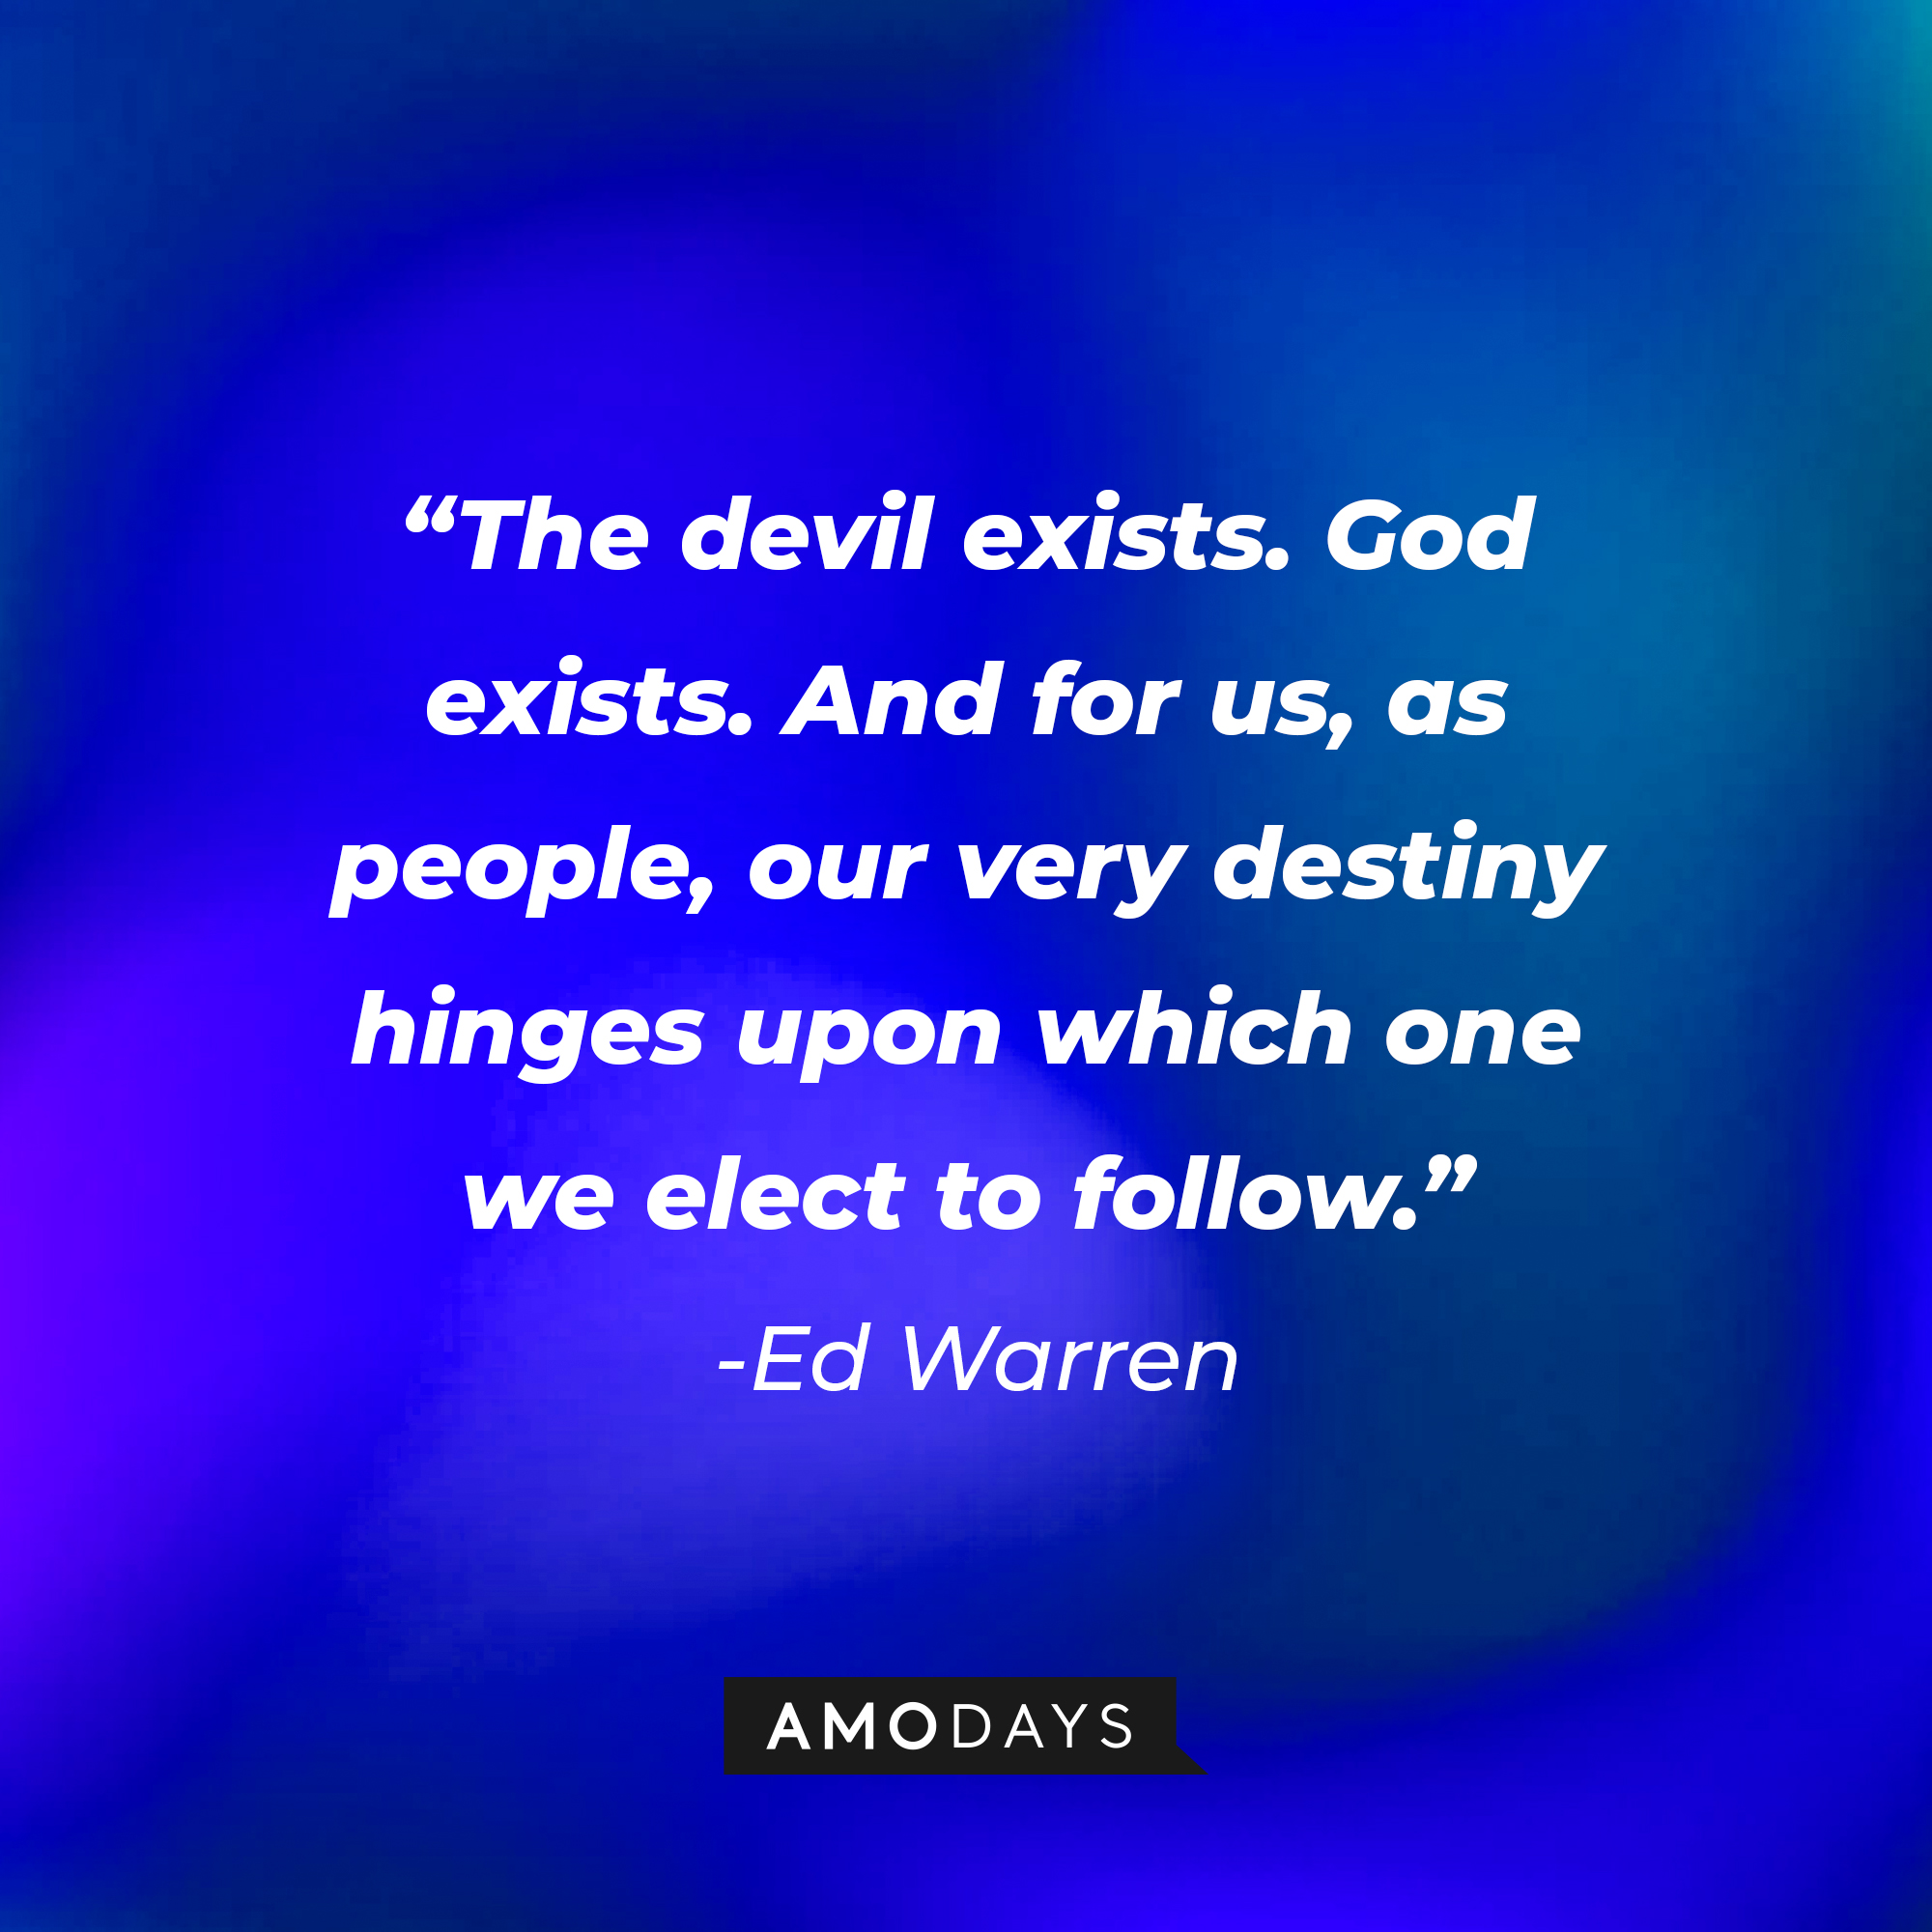 v++Ed Warren’s quote: “The devil exists. God exists. And for us, as people, our very destiny hinges upon which one we elect to follow.” | Source: AmoDays